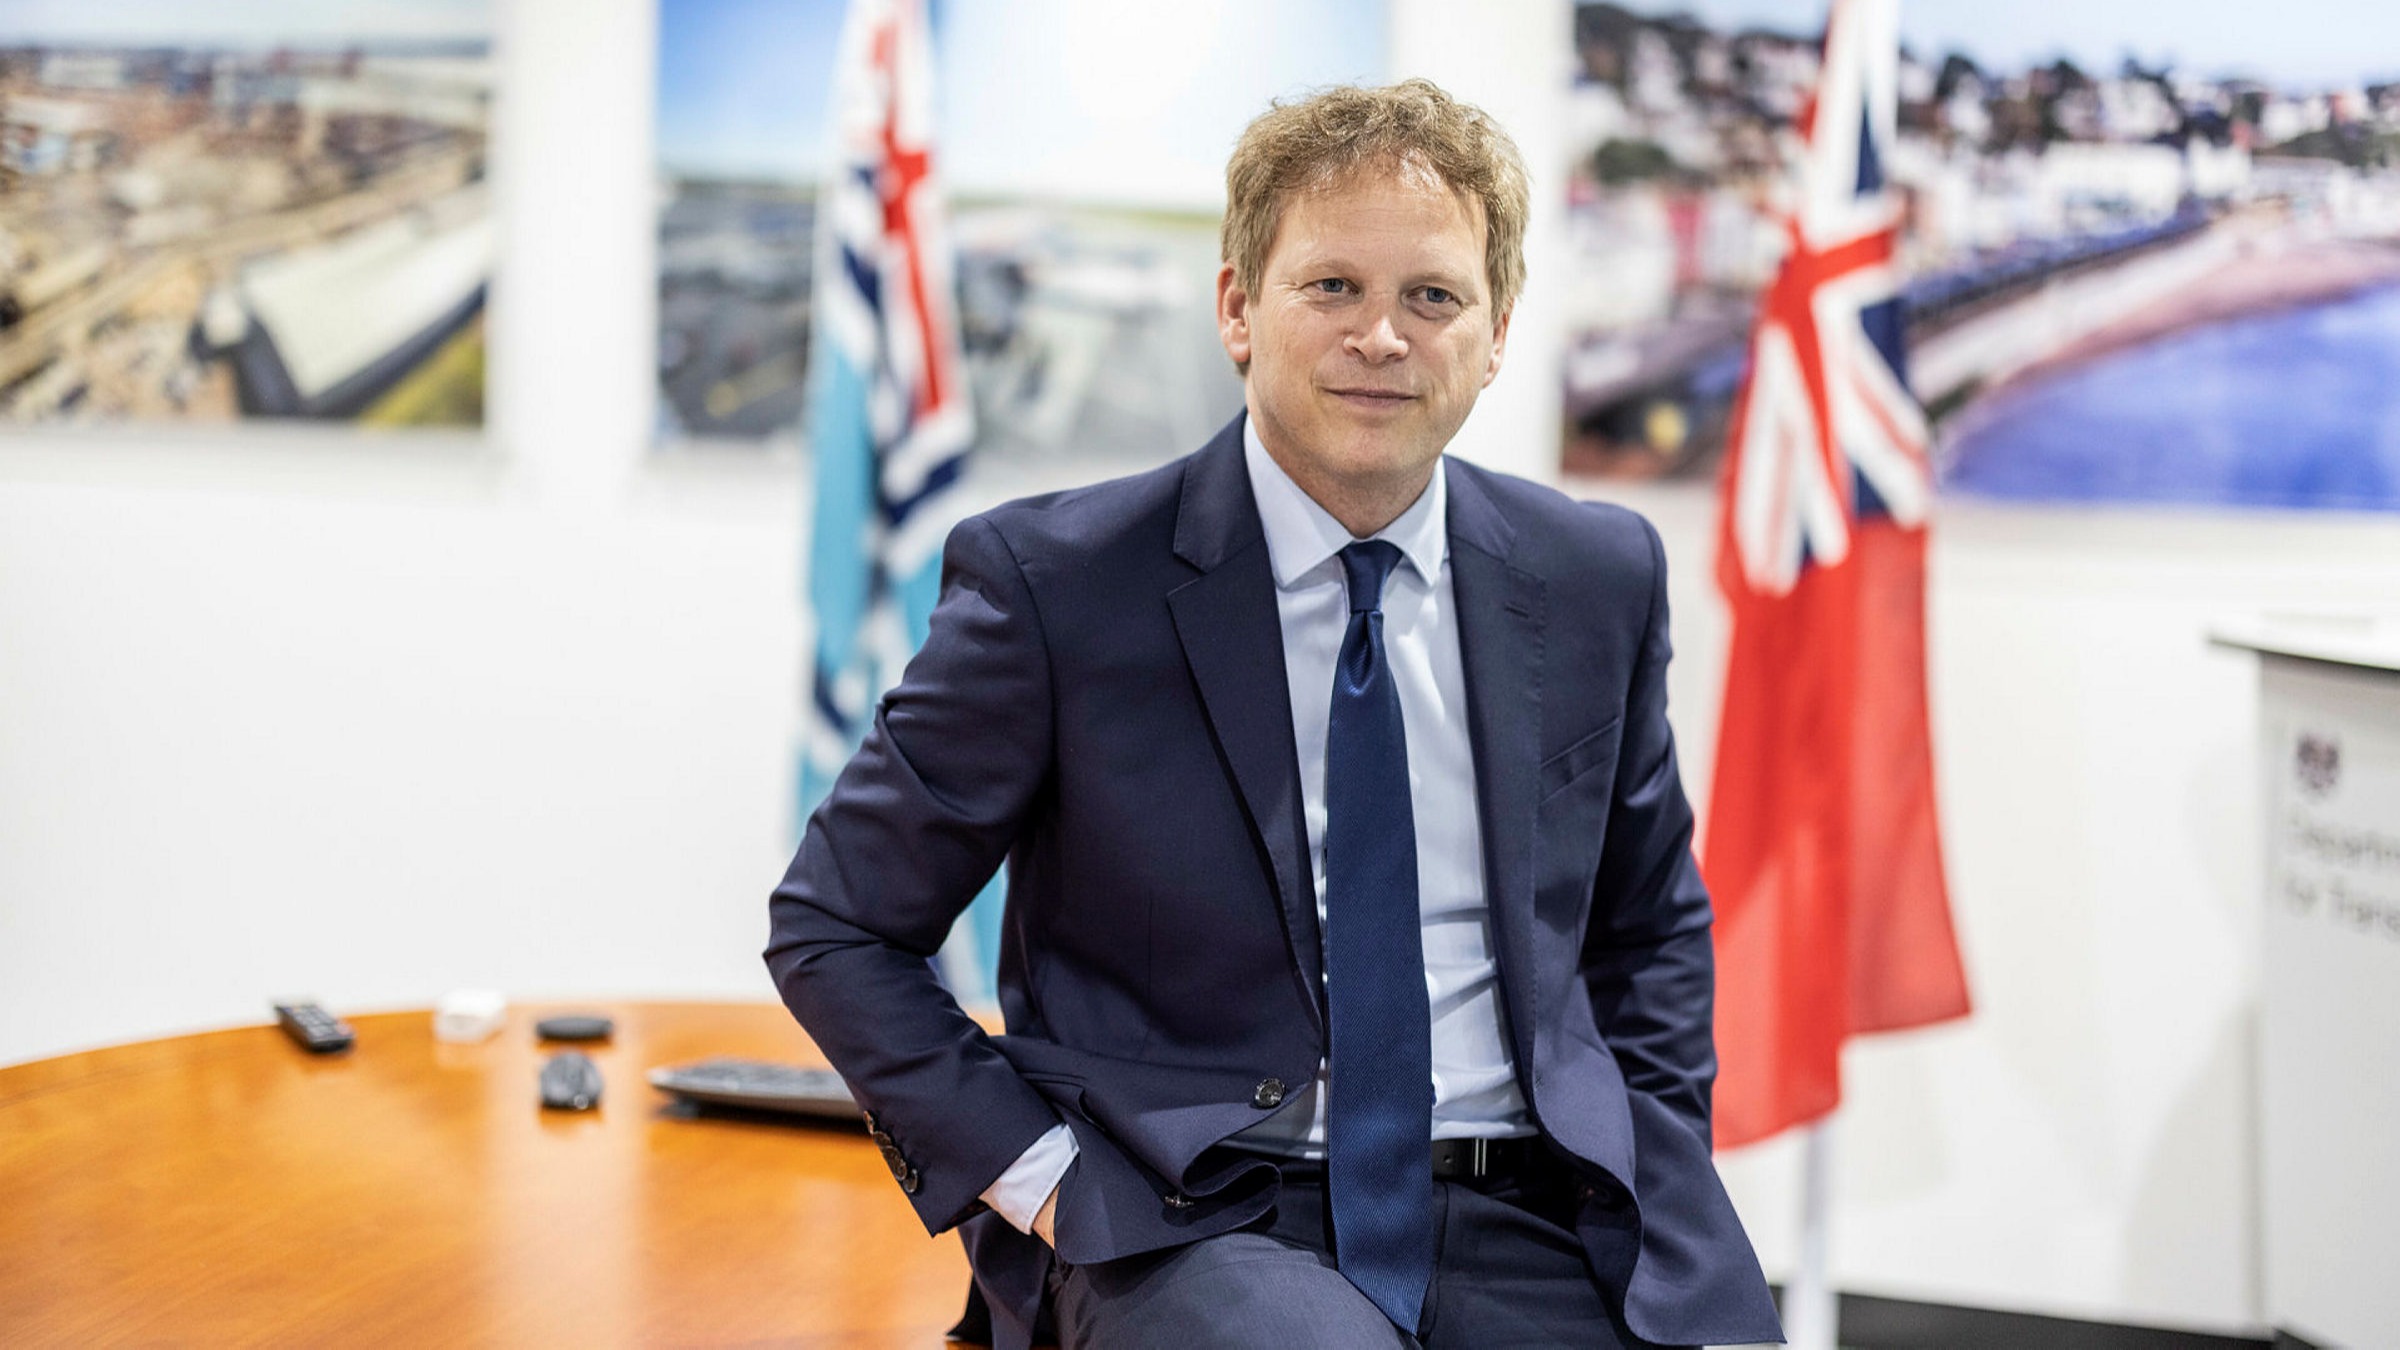 Grant Shapps Transport Secretary denies immigration to Solve Driver shortages while Morrisons warns about Price Increases!